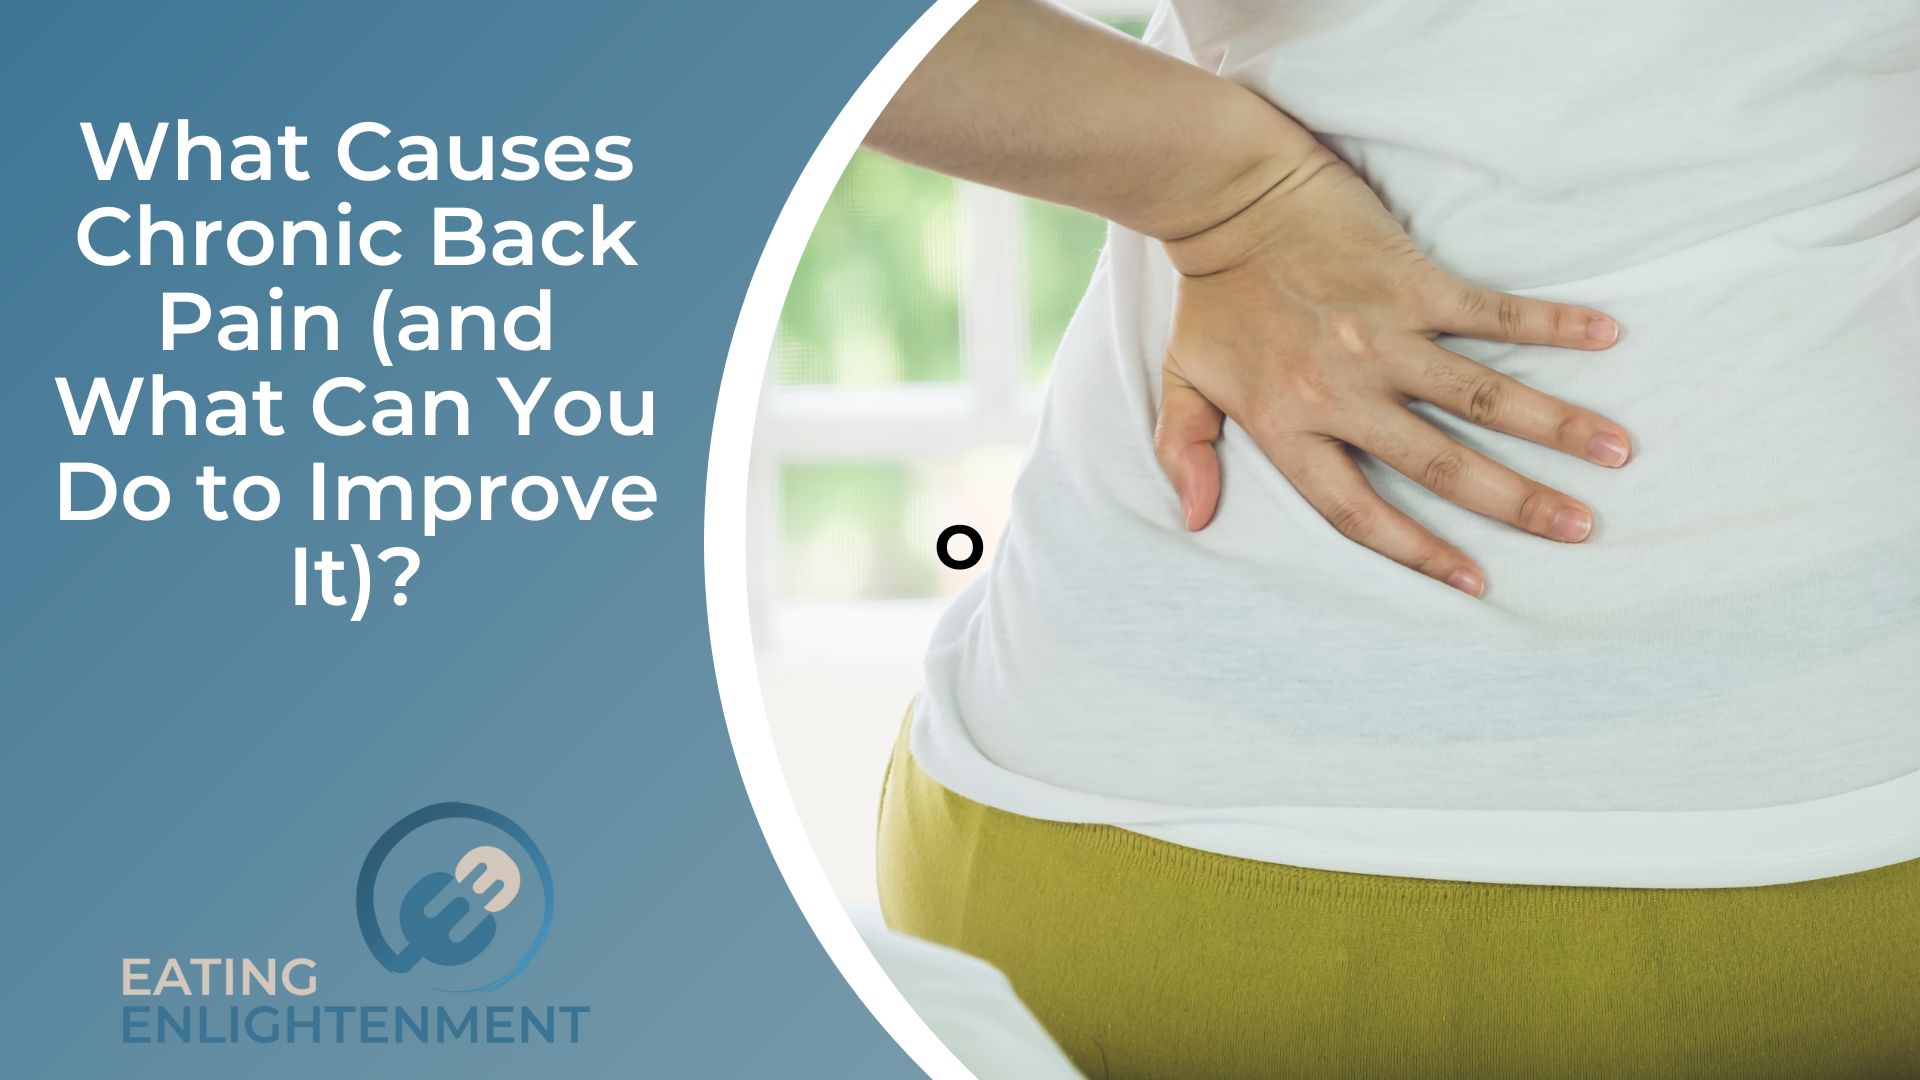 What Causes Chronic Back Pain (and What Can You Do to Improve It)